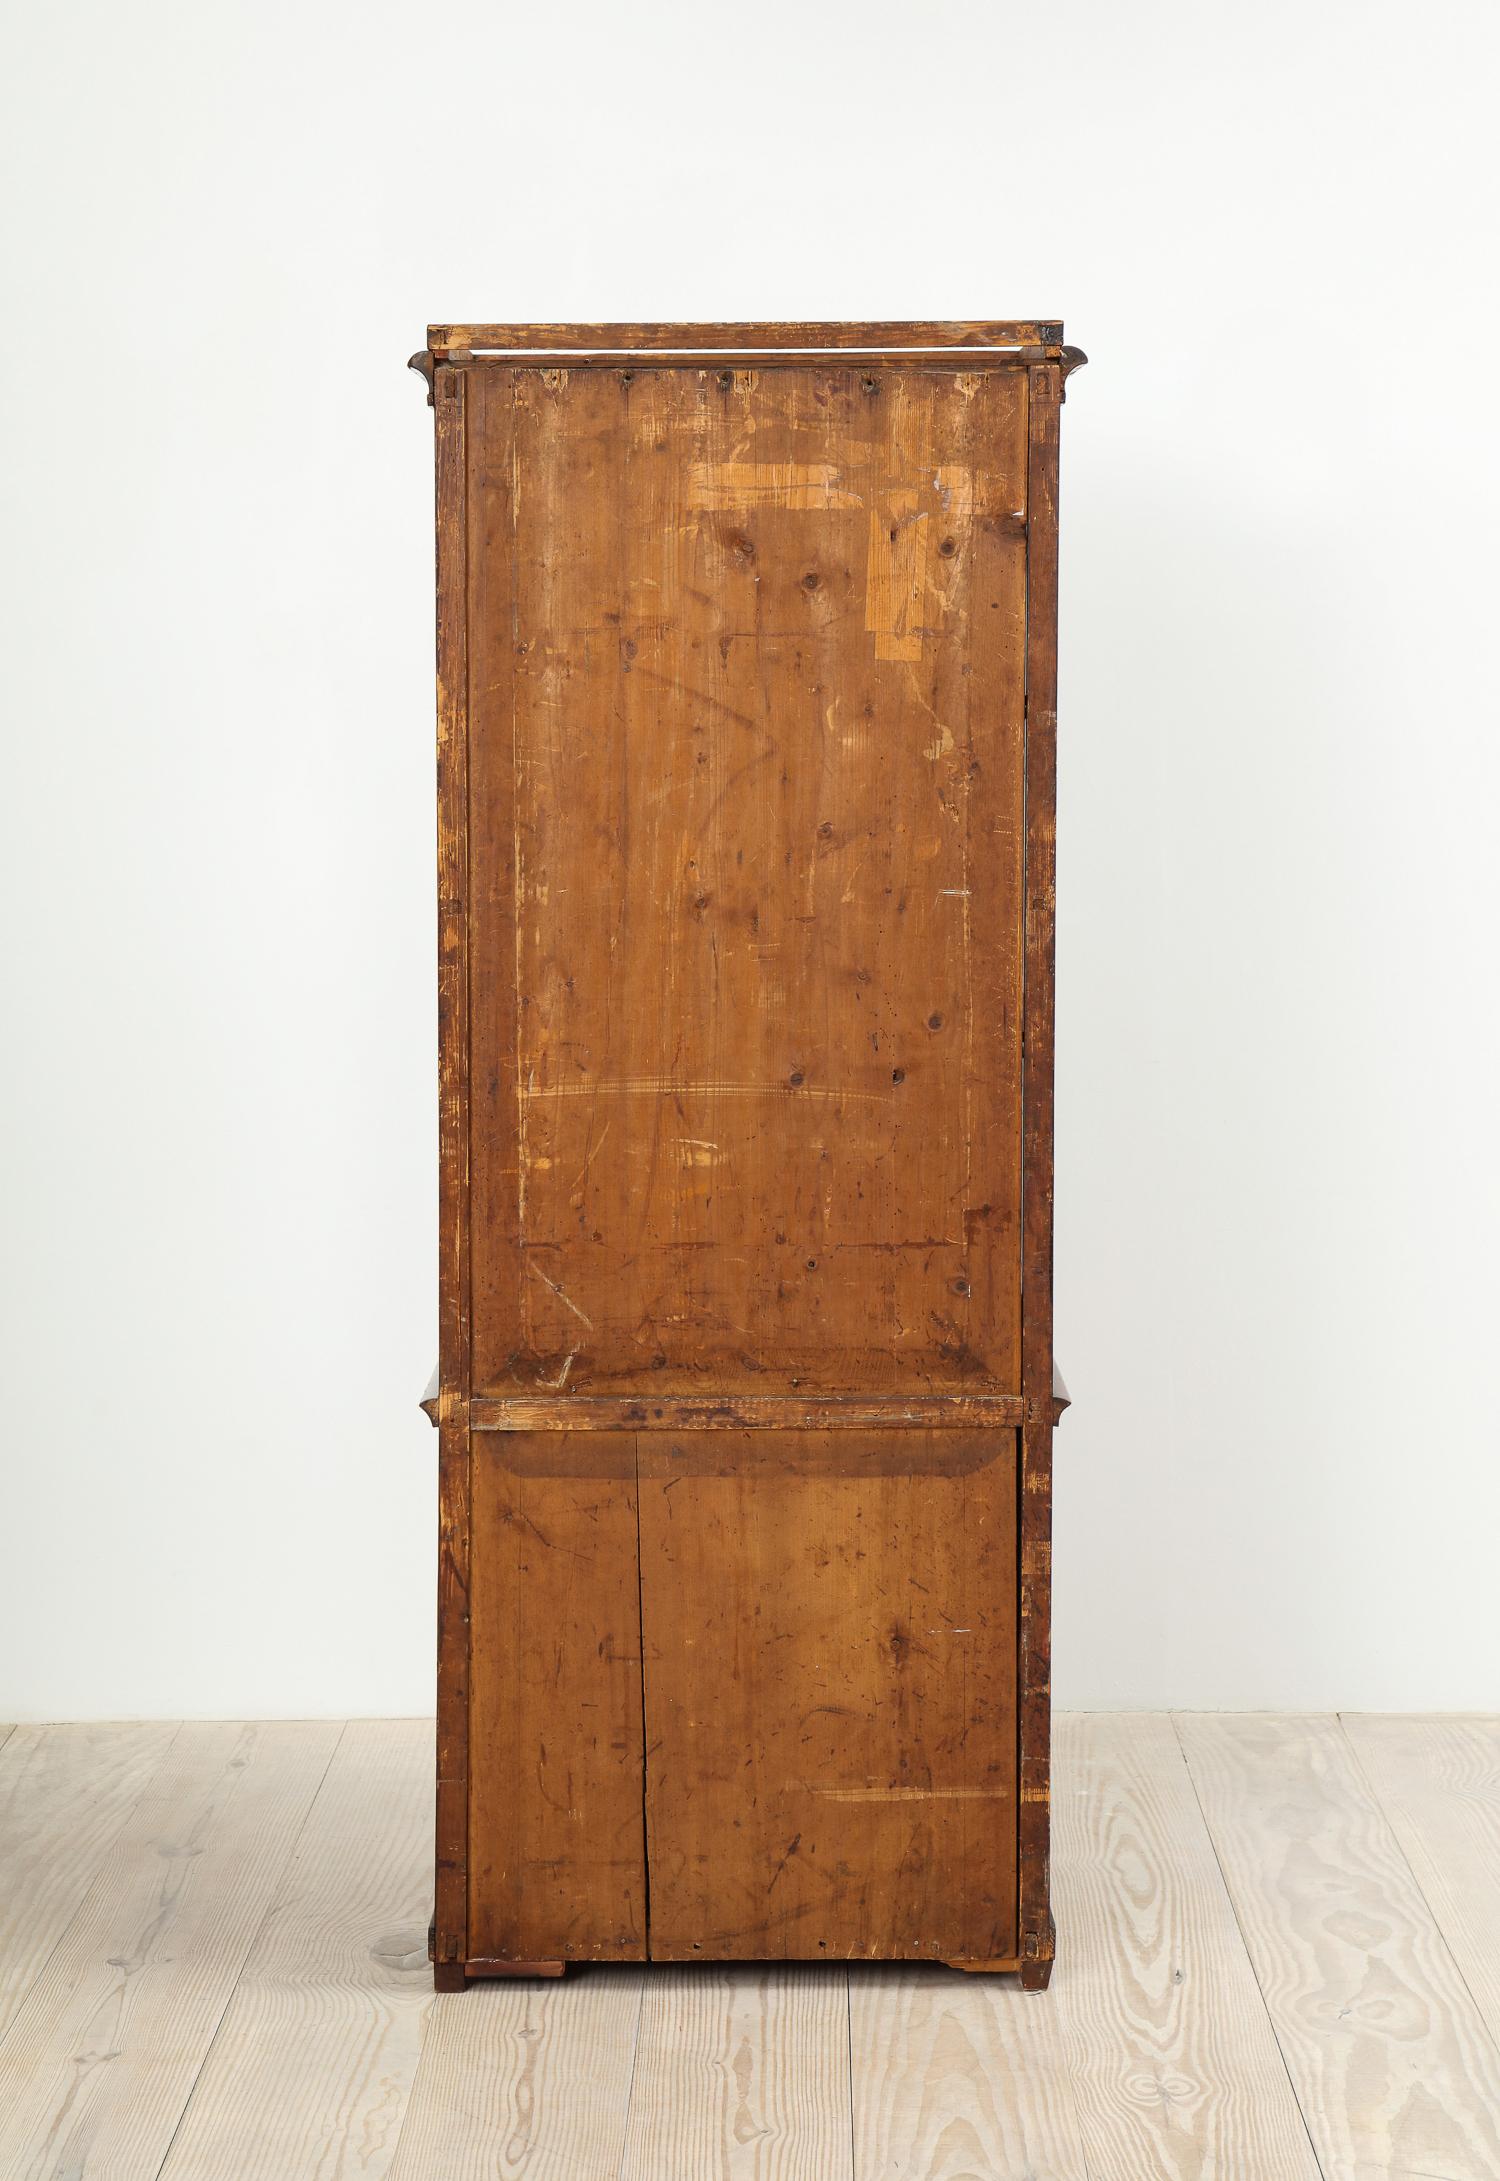 Russian Neoclassical Mahogany Brass-Inlaid Cabinet, Circa 1820 For Sale 3